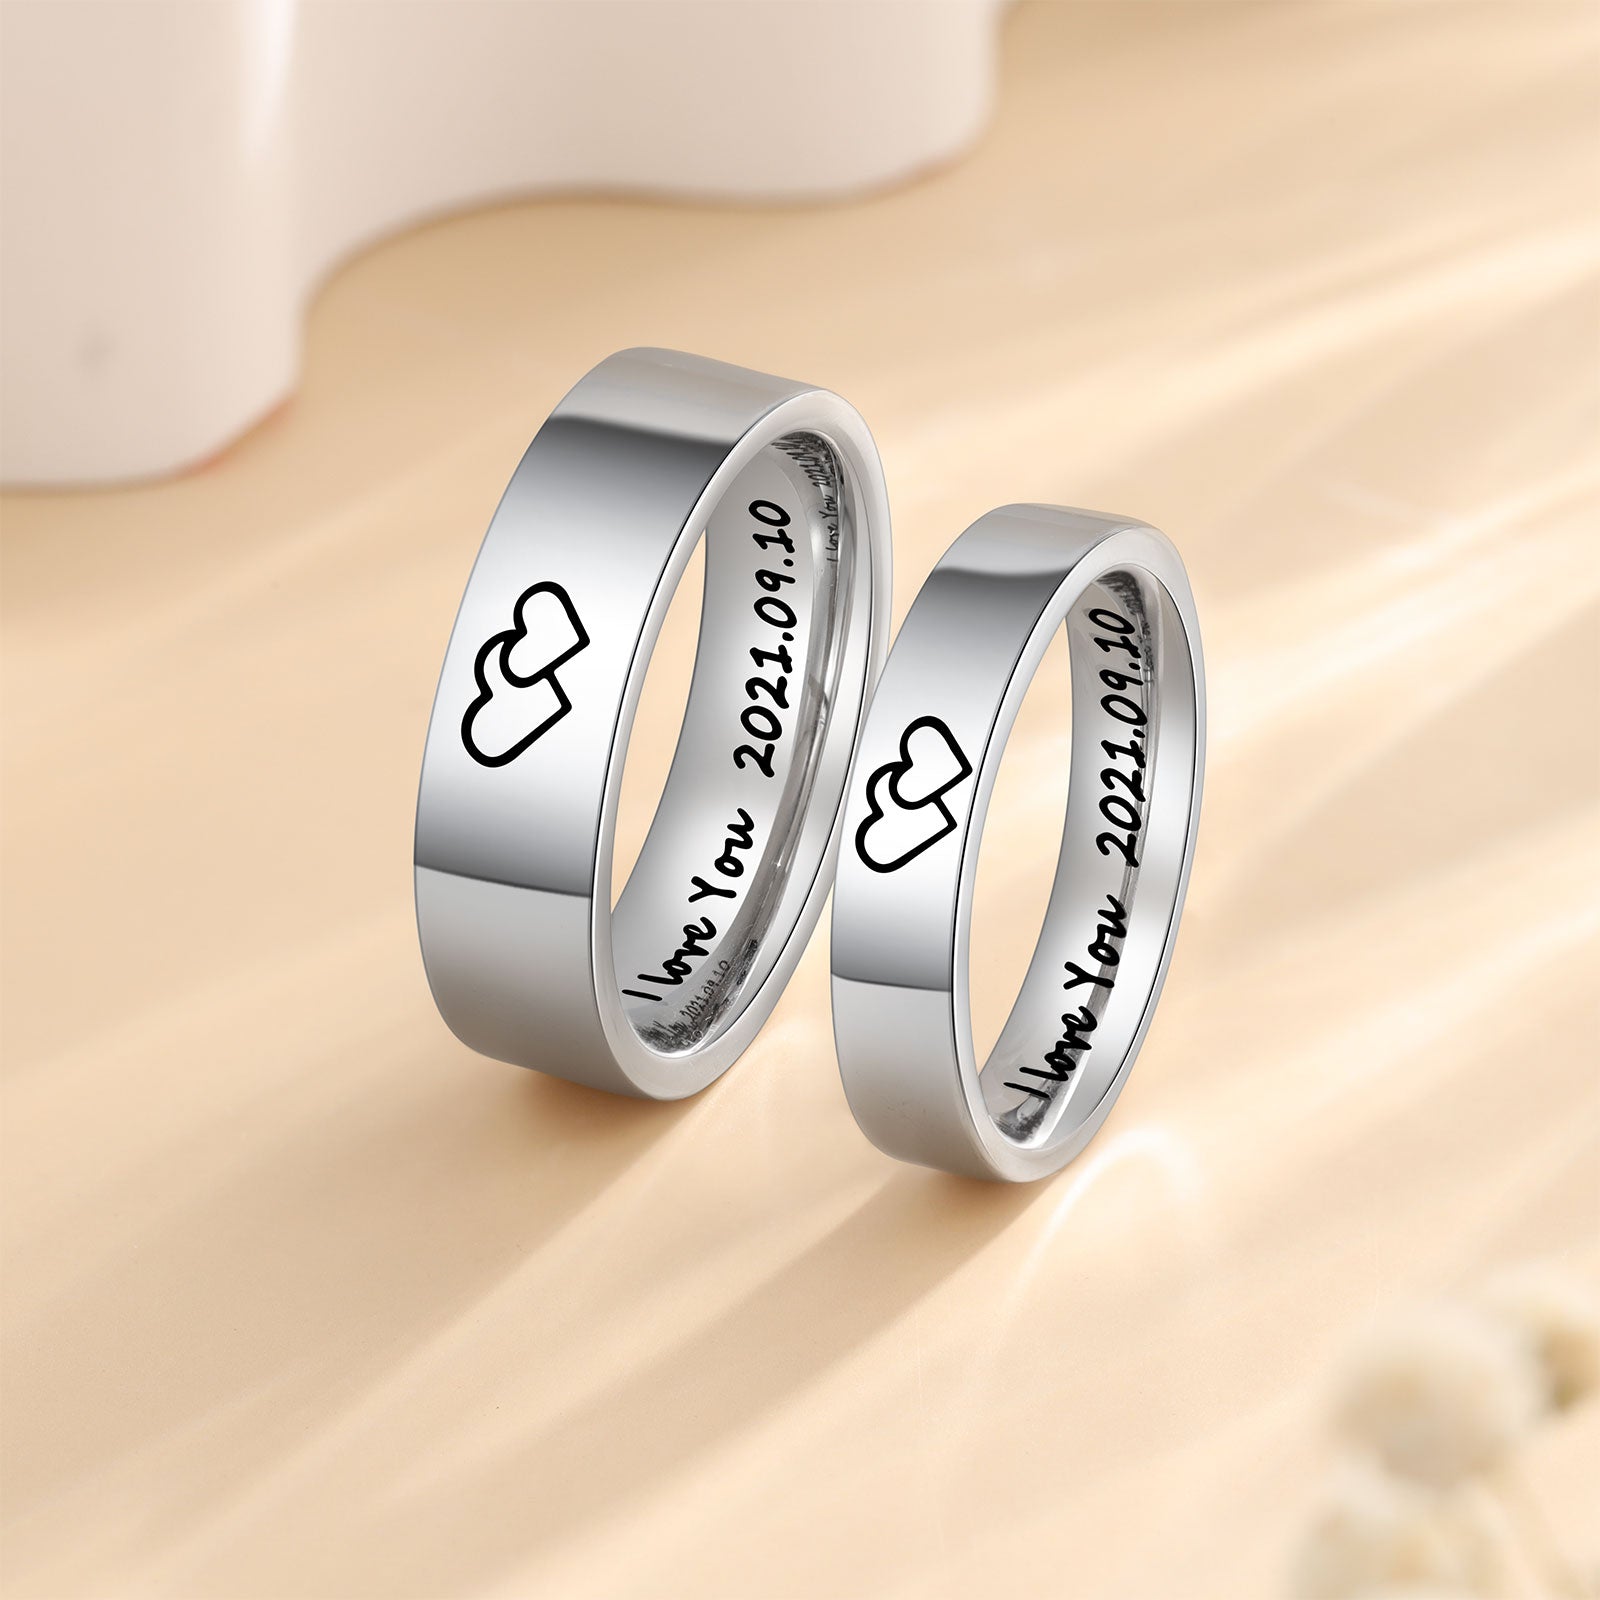 Think Engraved wedding Ring Personalized His and Hers Traditional Promise Ring or Wedding Ring Set Couples Rings